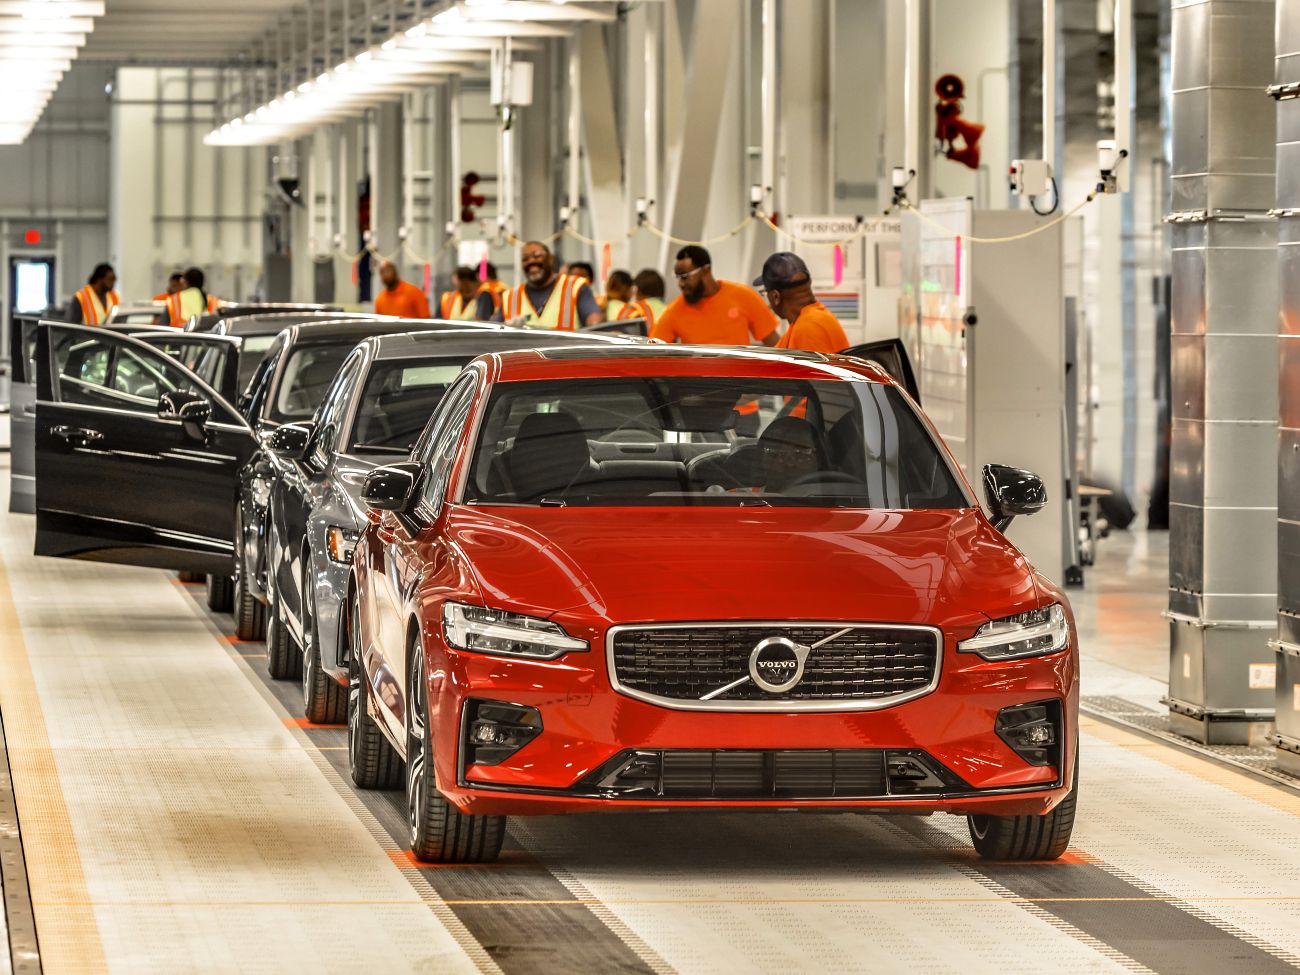 Volvo’s new manufacturing plant in South Carolina, USA